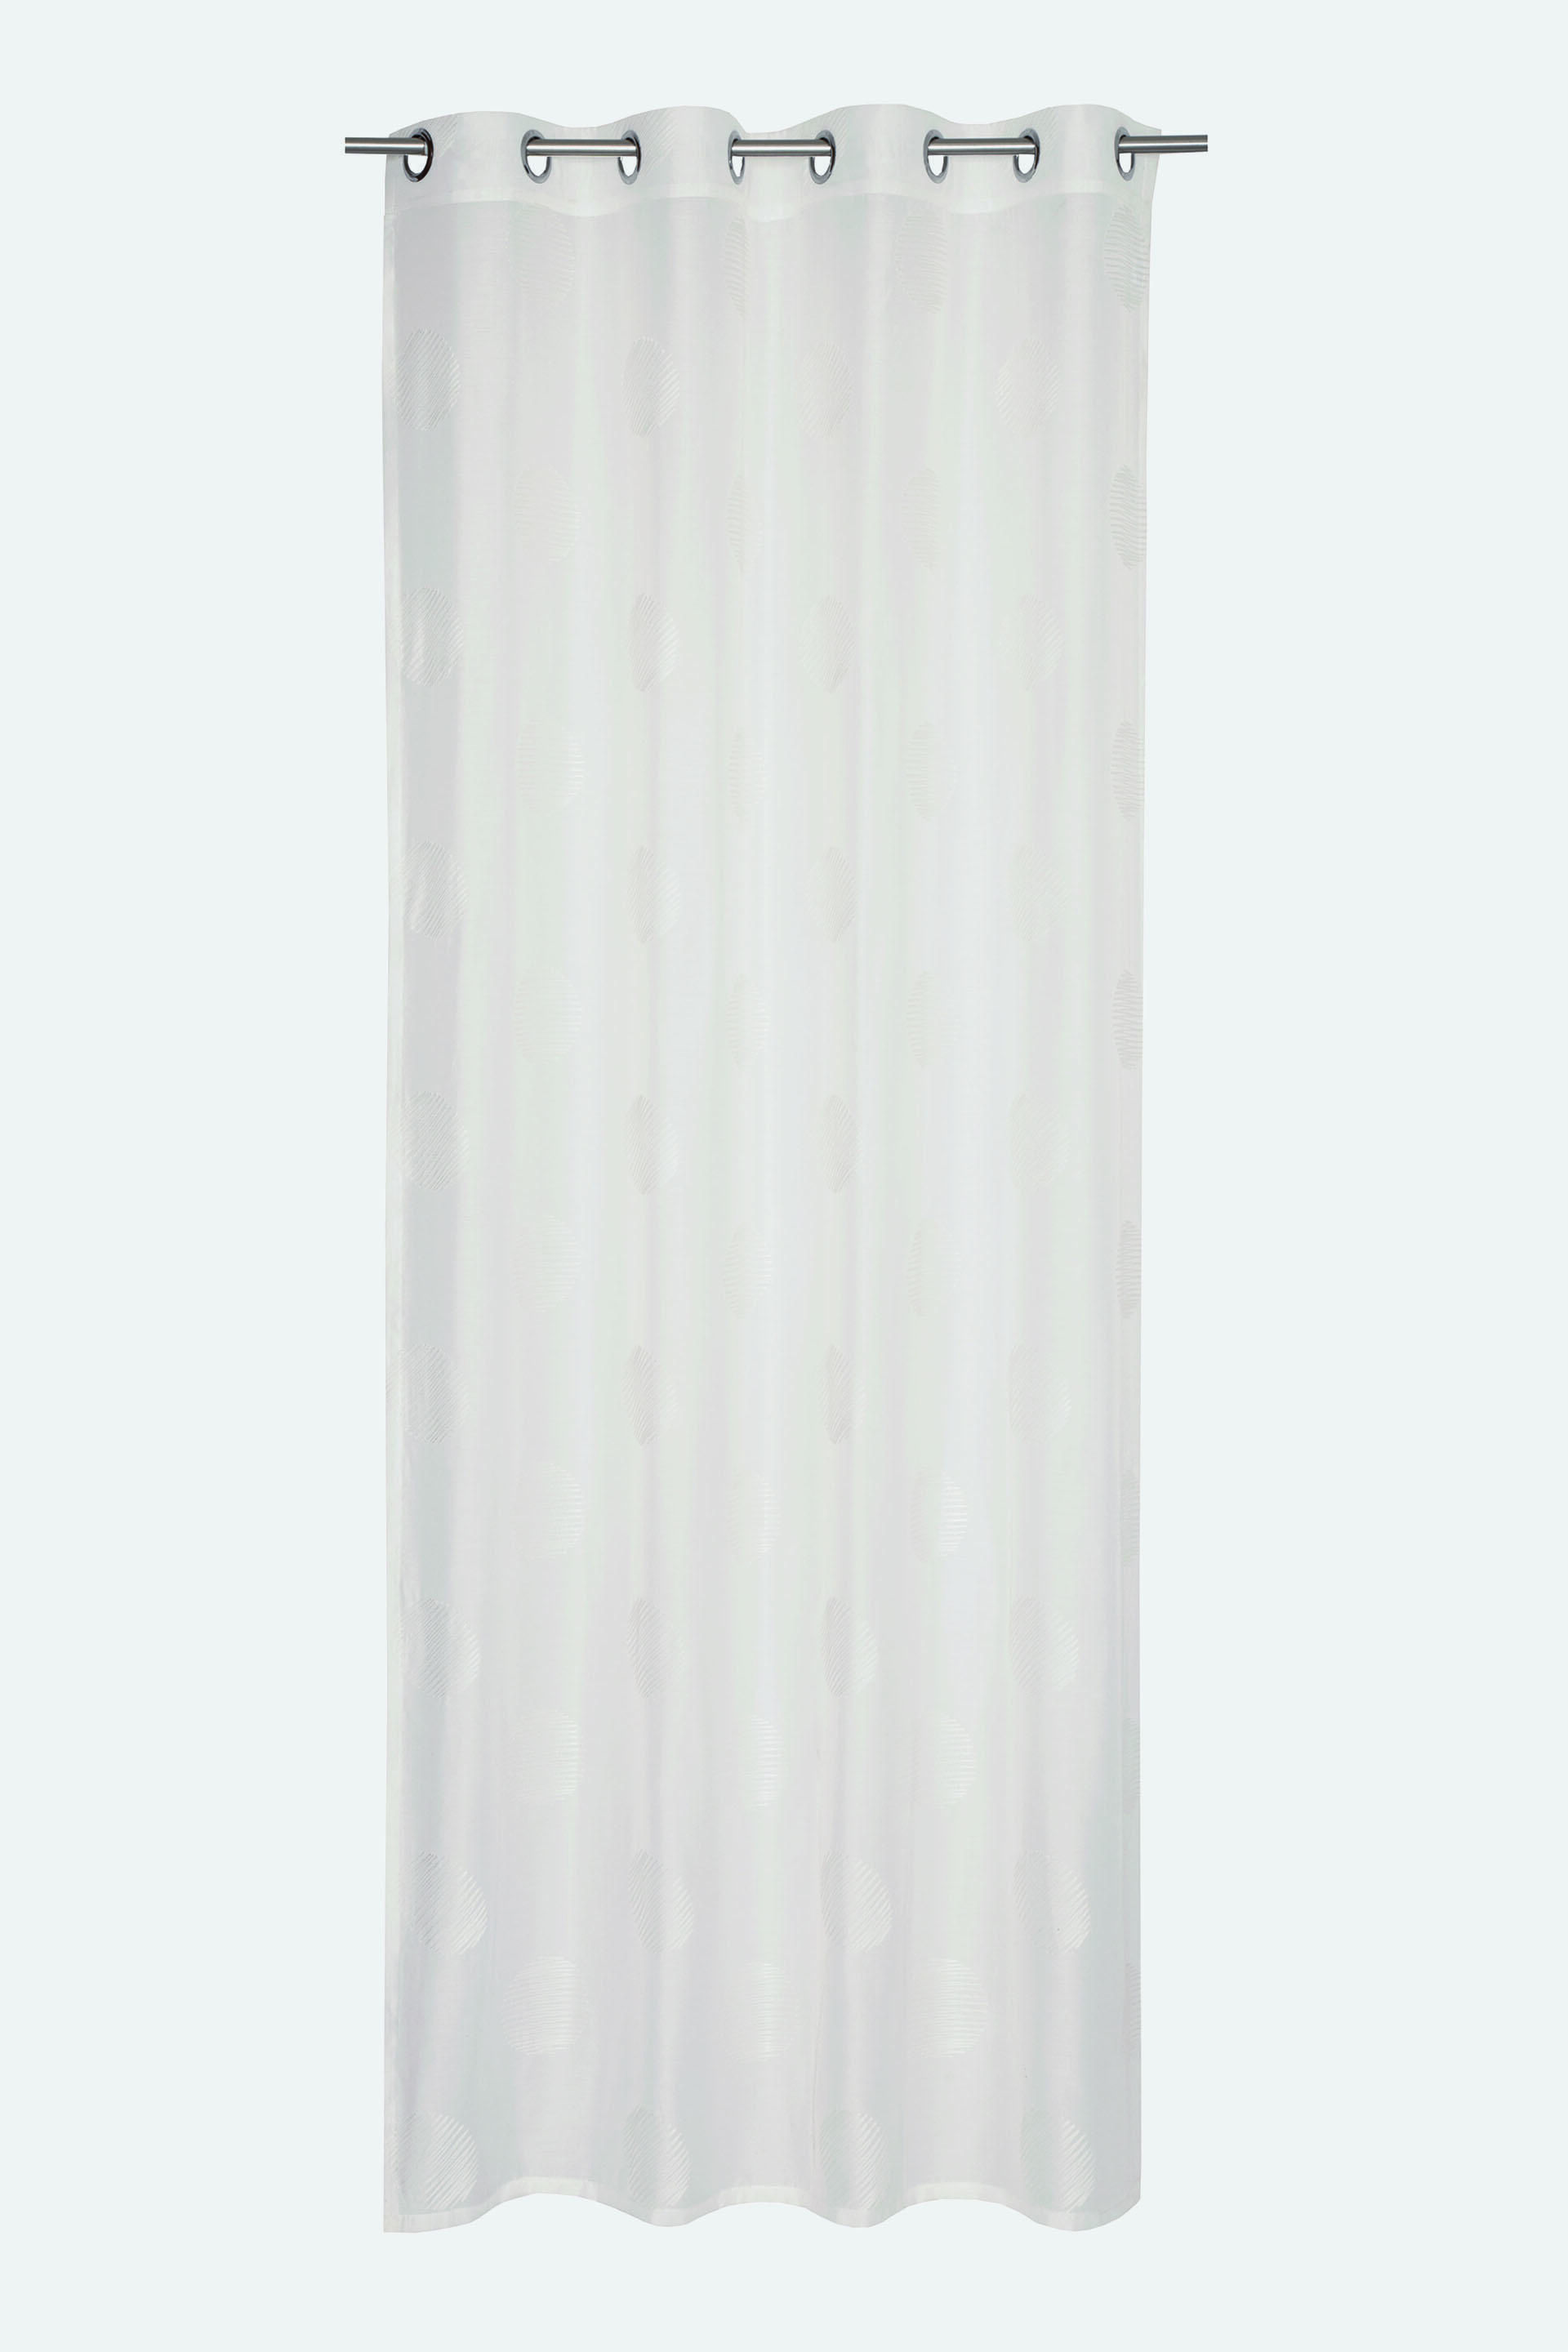 Esprit curtain Sheer embroidery eyelet with